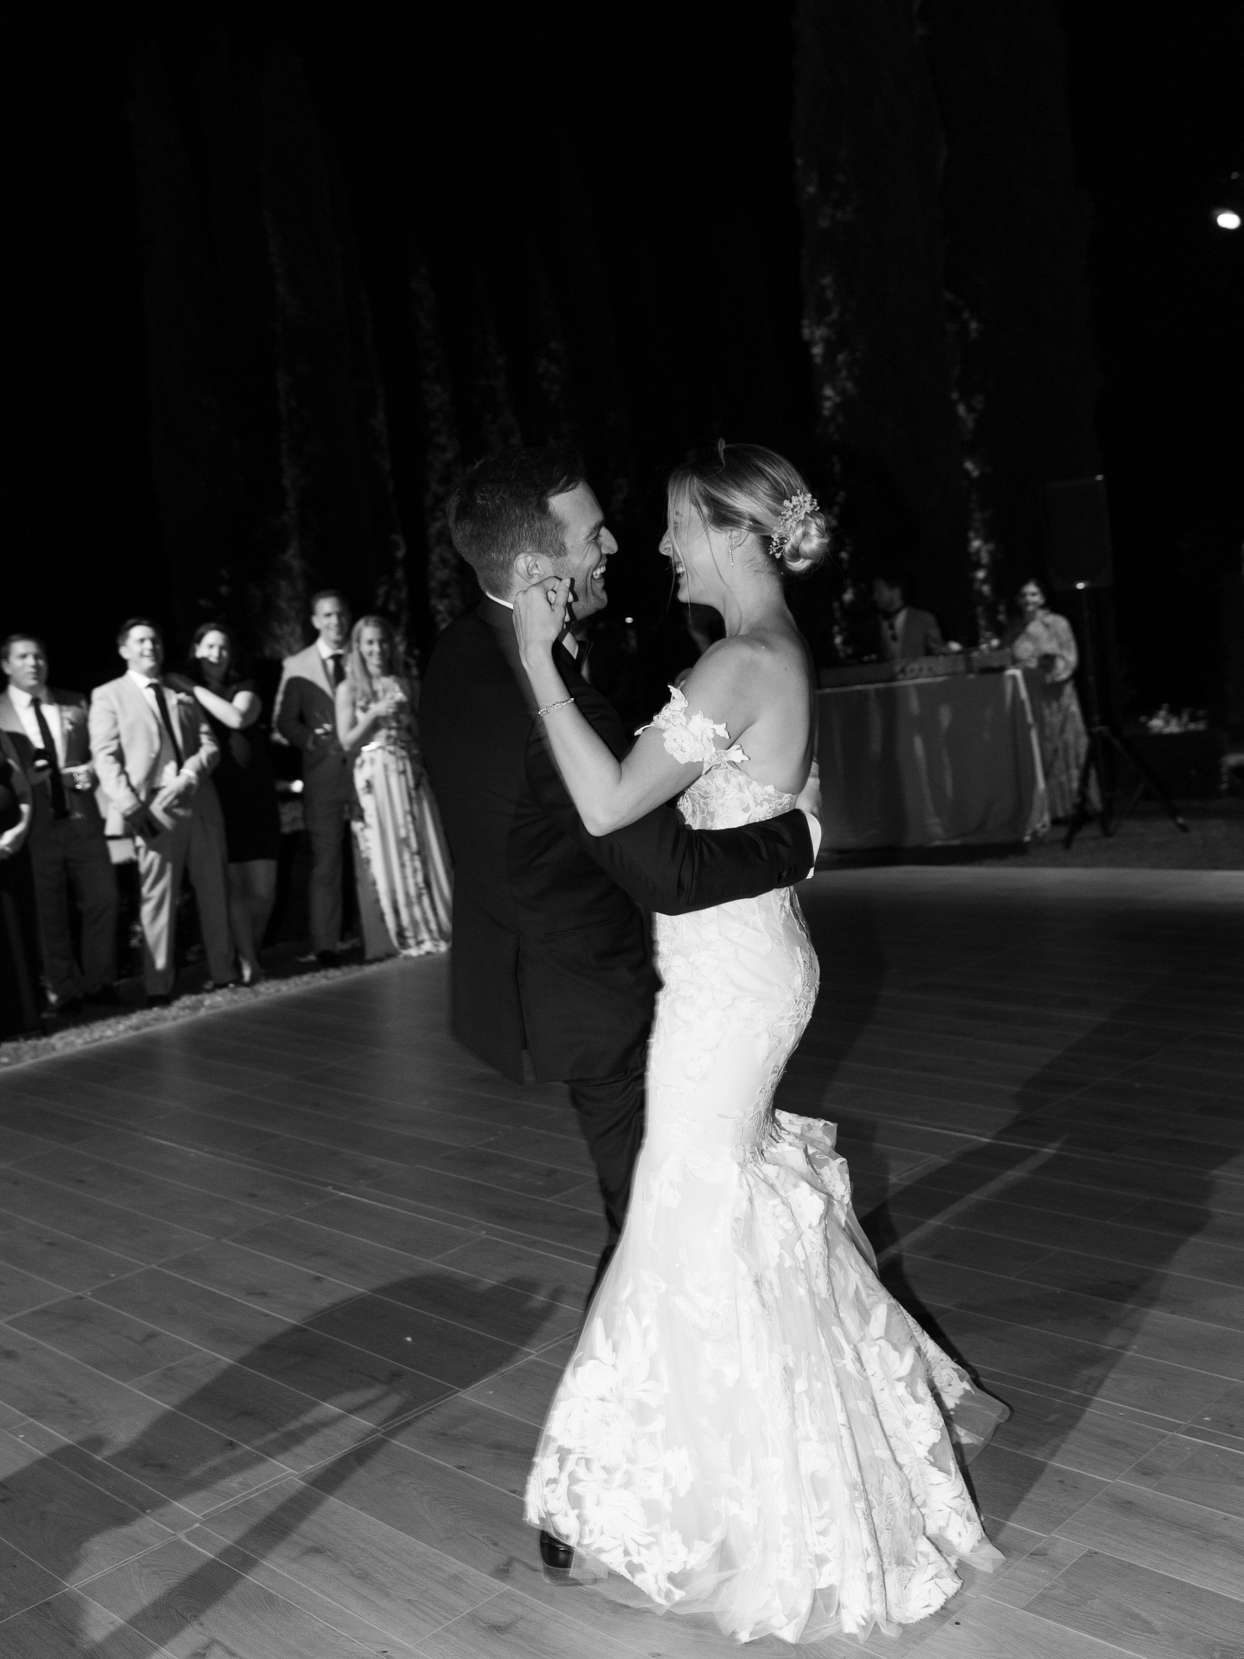 A Memorable First Dance